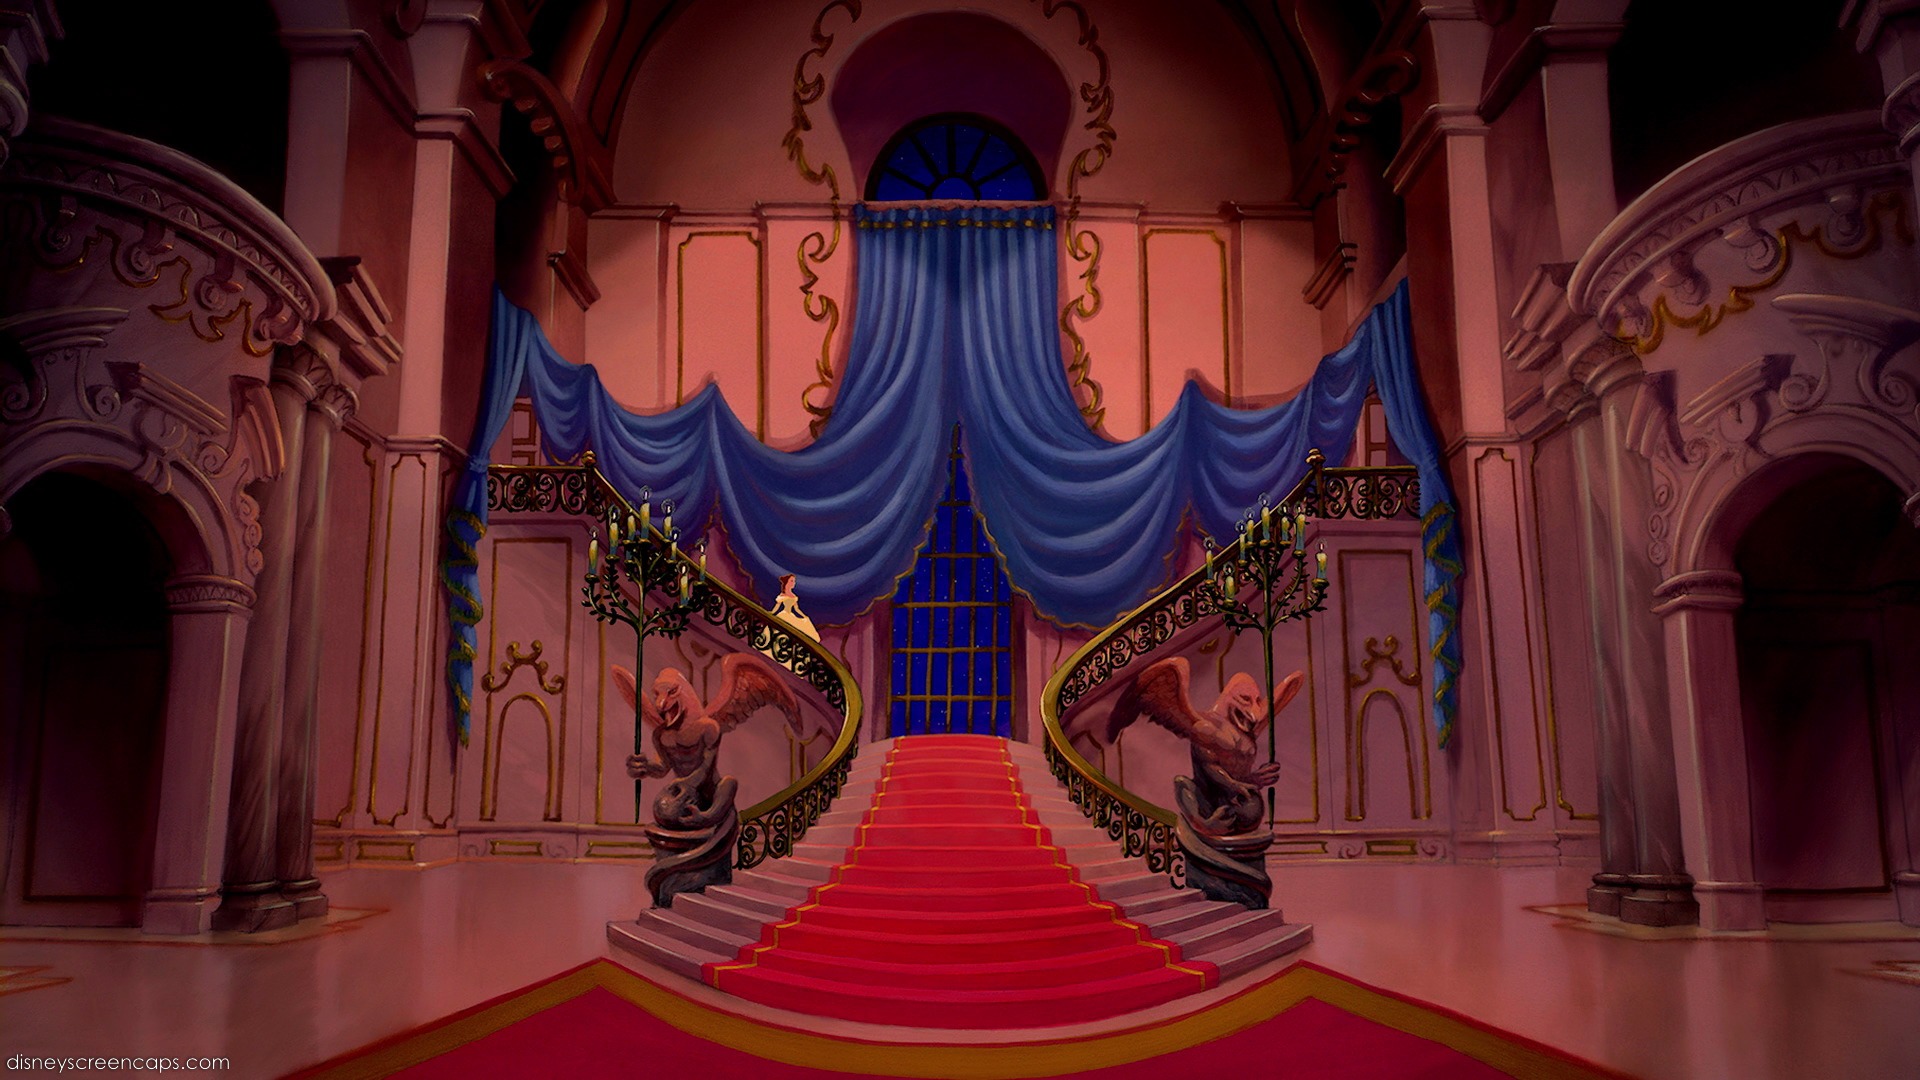 Empty Backdrop from Beauty and the Beast   disney crossover Image